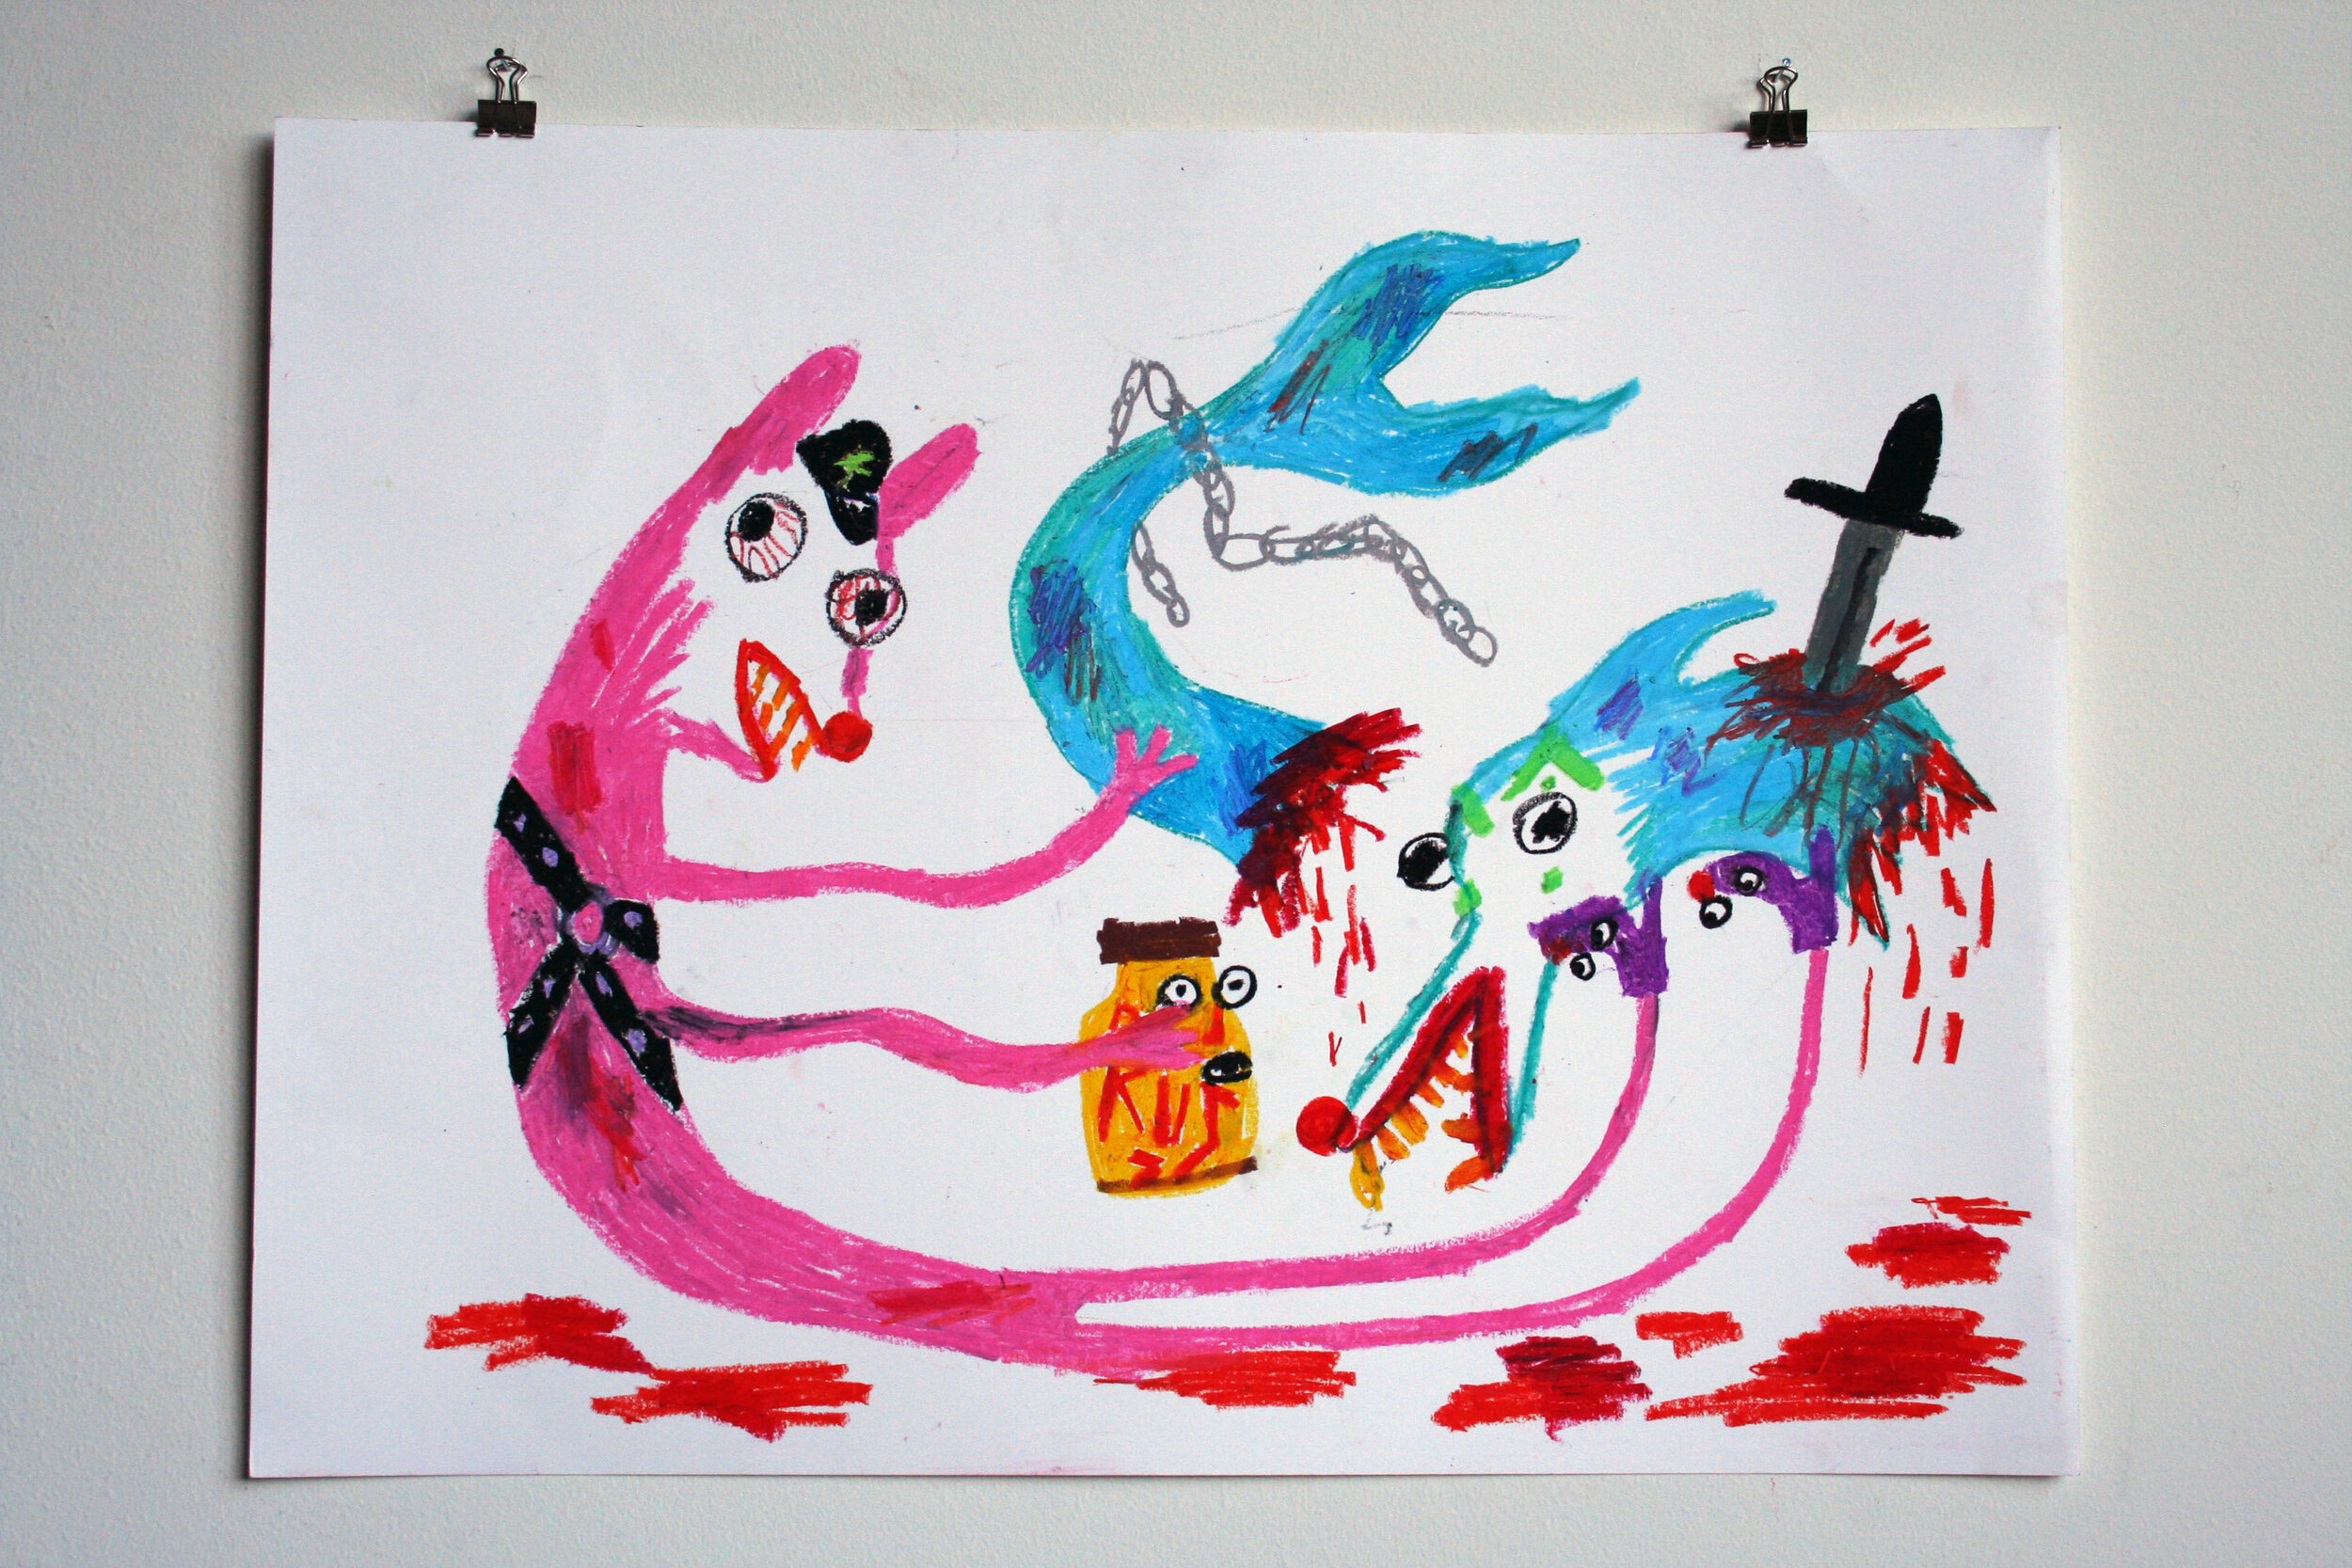   The Pleather Puppy Ripped the Dolphin Witch in Half , 2014  18 x 24 inches (45.72 x 60.96 cm.)  Oil pastel on paper 